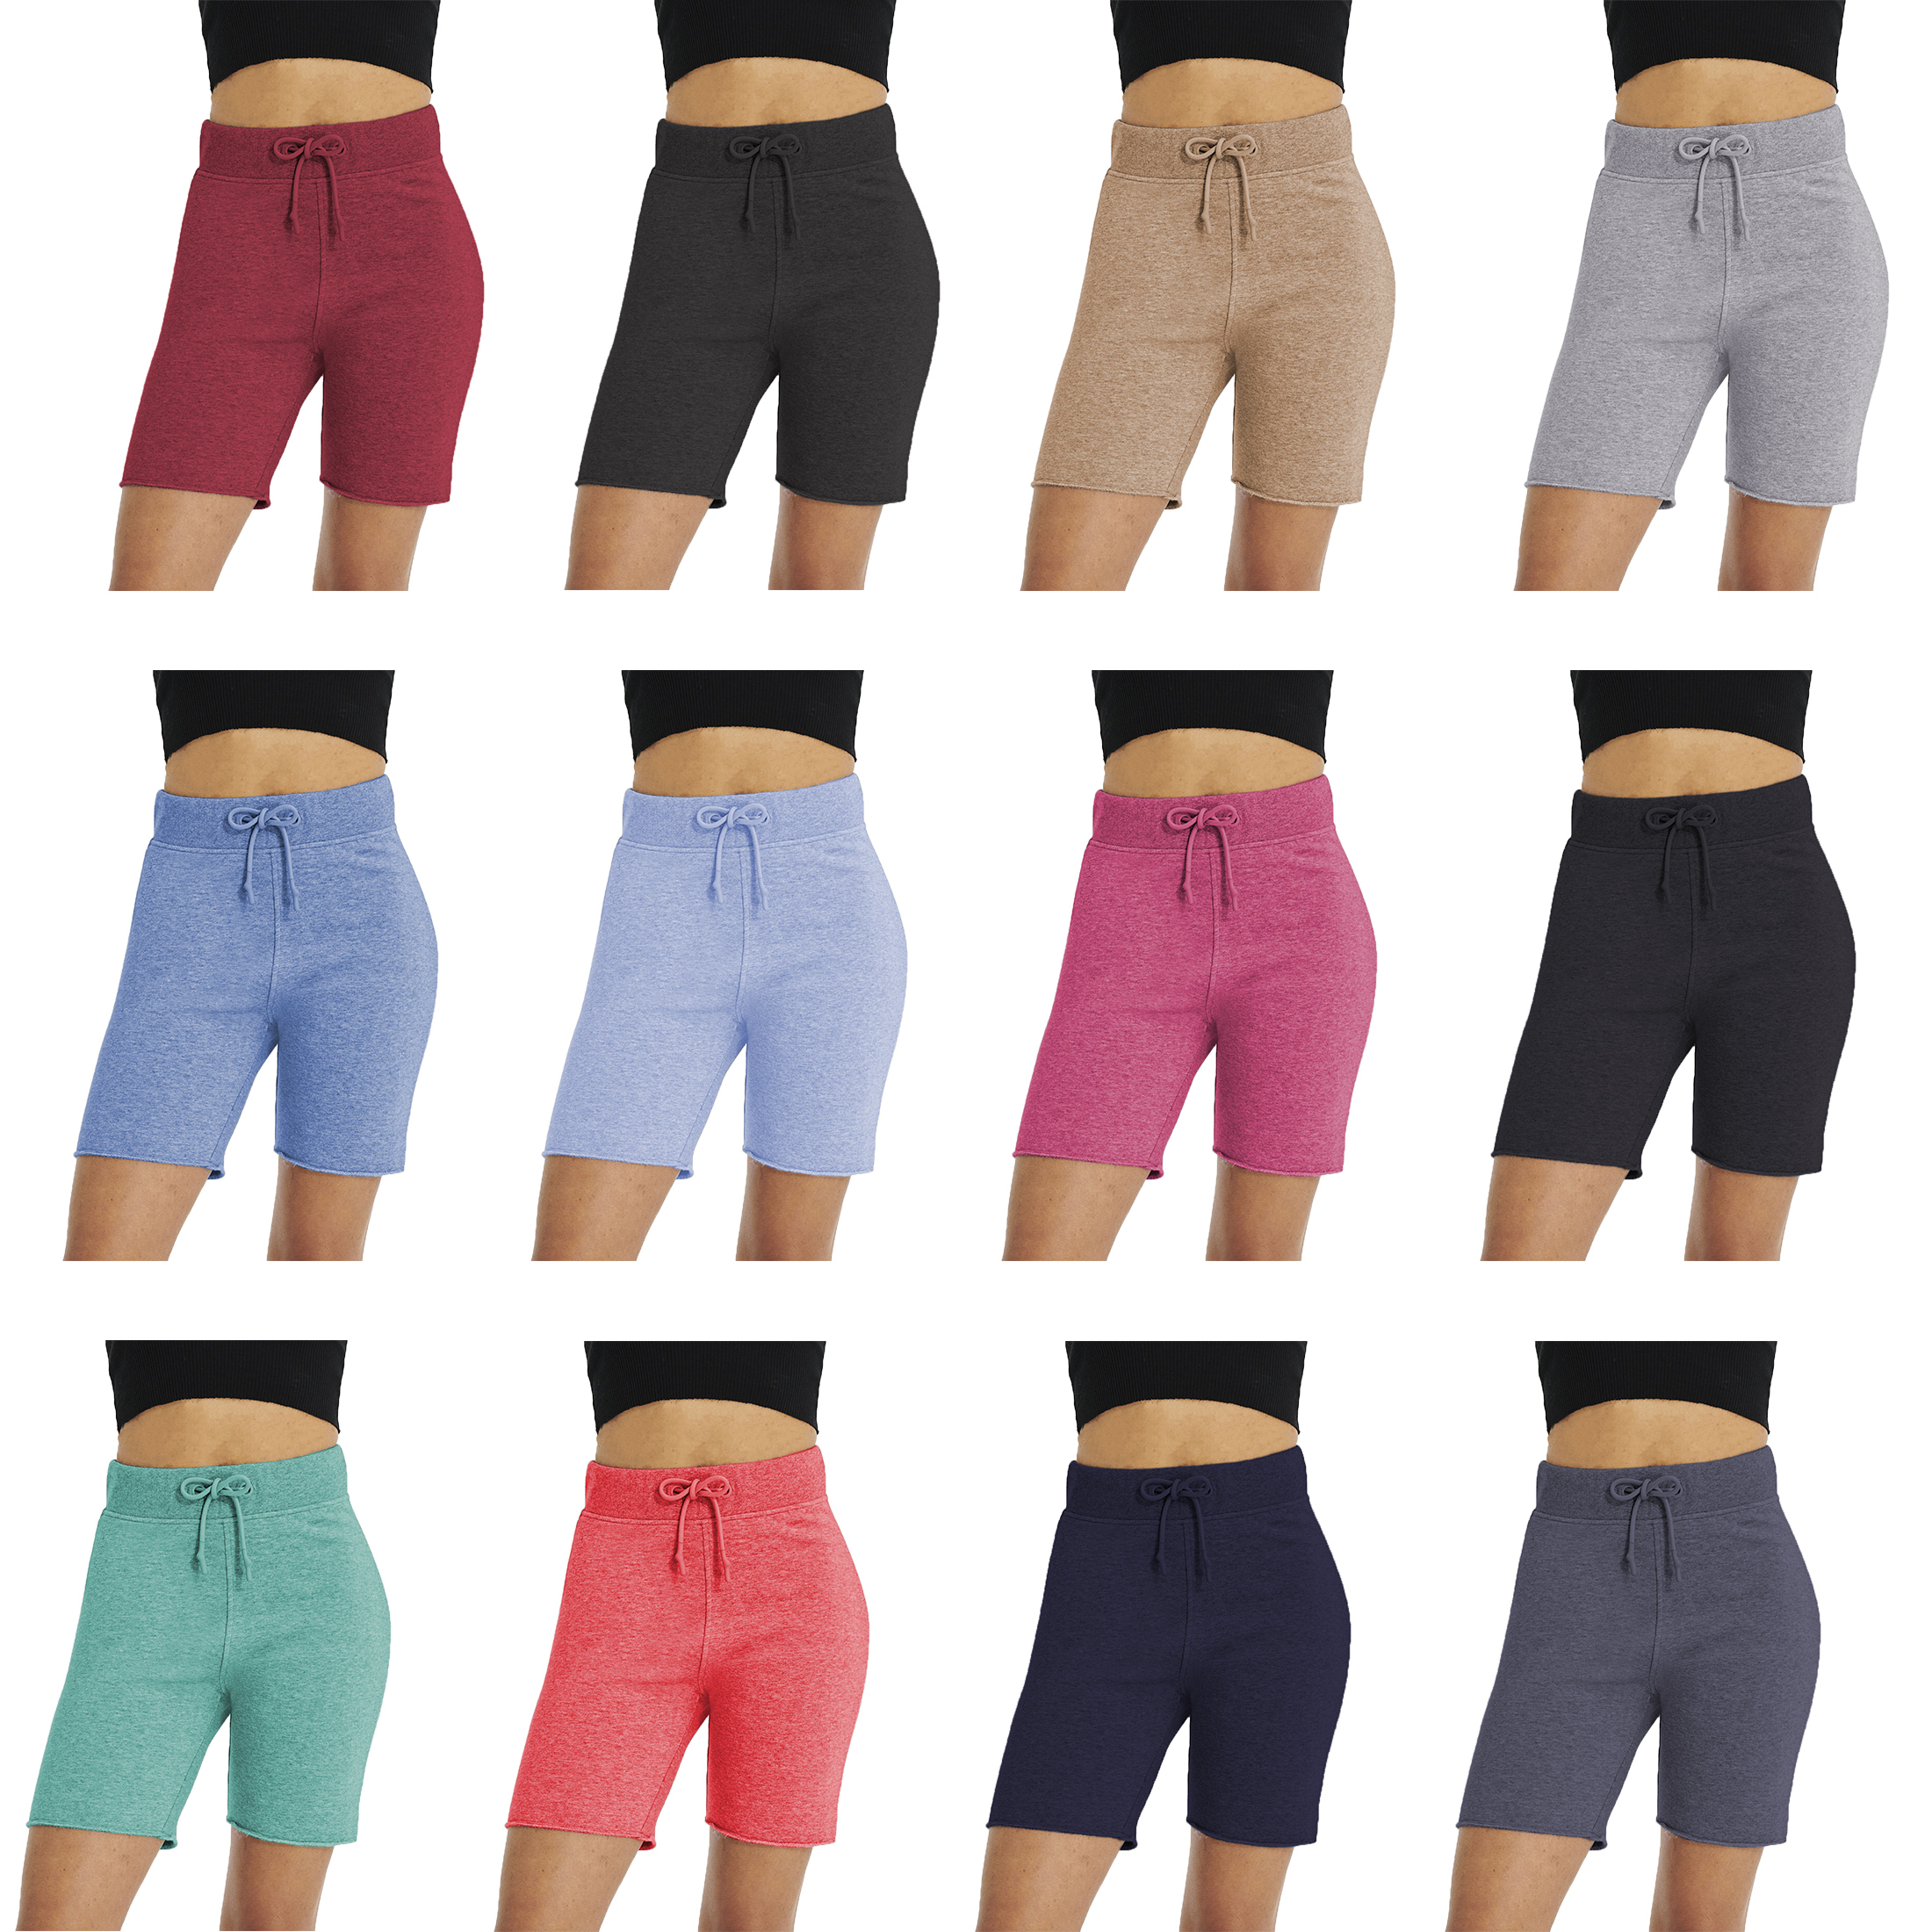 3-Pack: Ladies Soft Summer Stretch Active Athletic Lounge Sports Workout Bermuda Shorts - X-Large